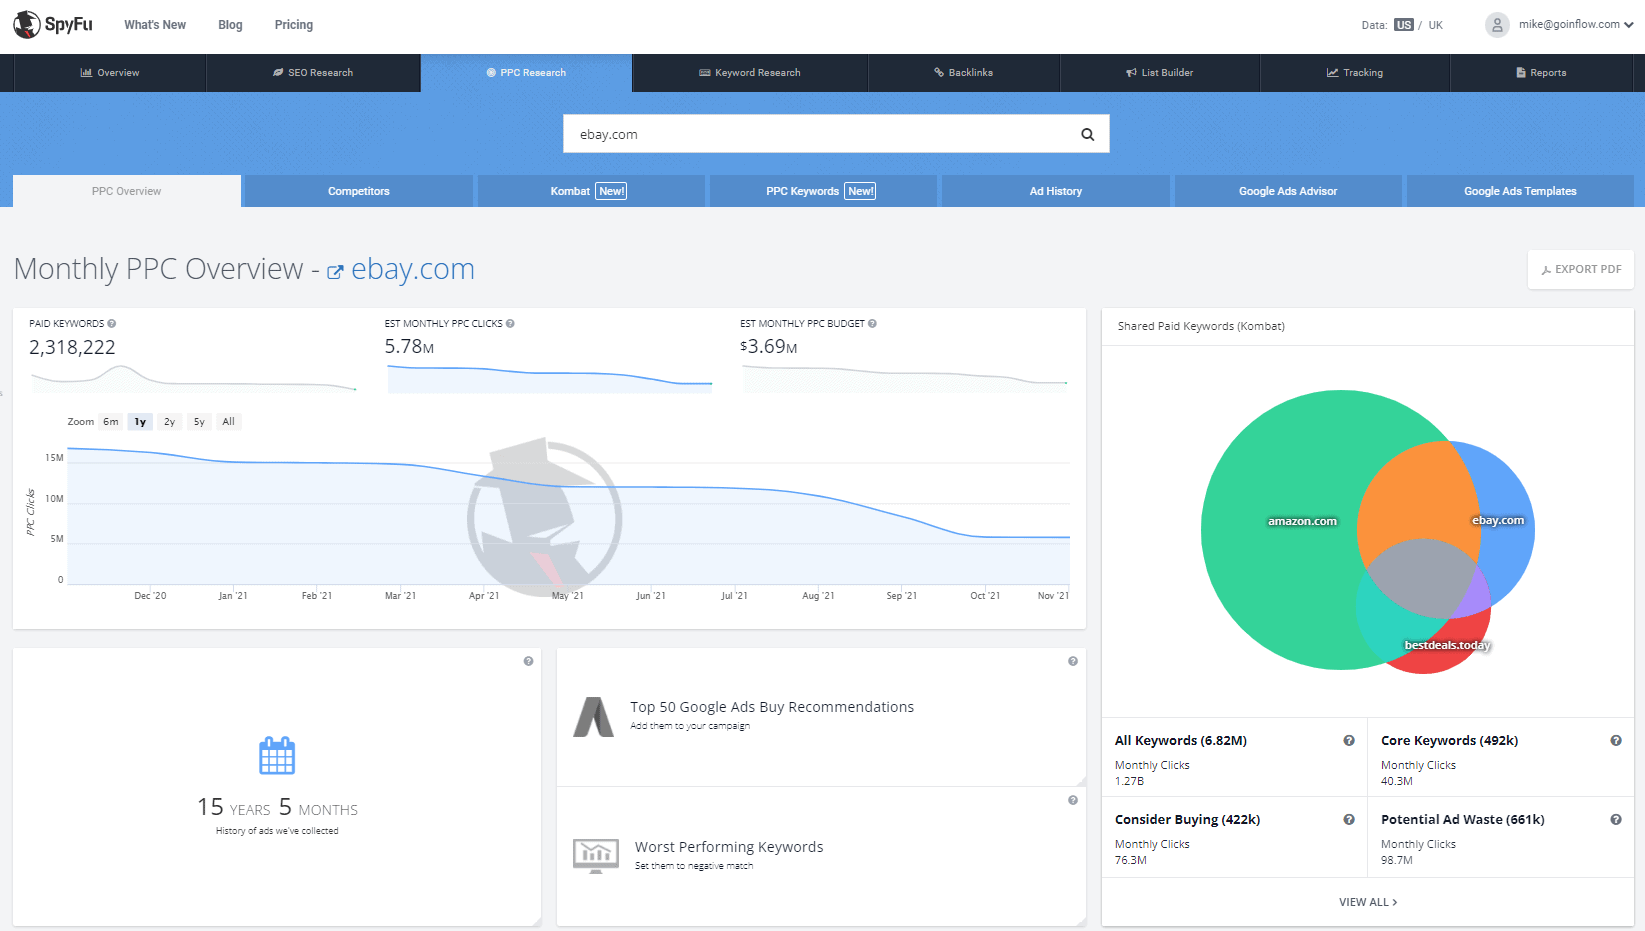 Ahrefs' Paid Keywords dashboard, showing results for eBay.com. Data includes paid keywords, ads, block, volume, keyword density, cost-per-click, traffic, results, and URL.